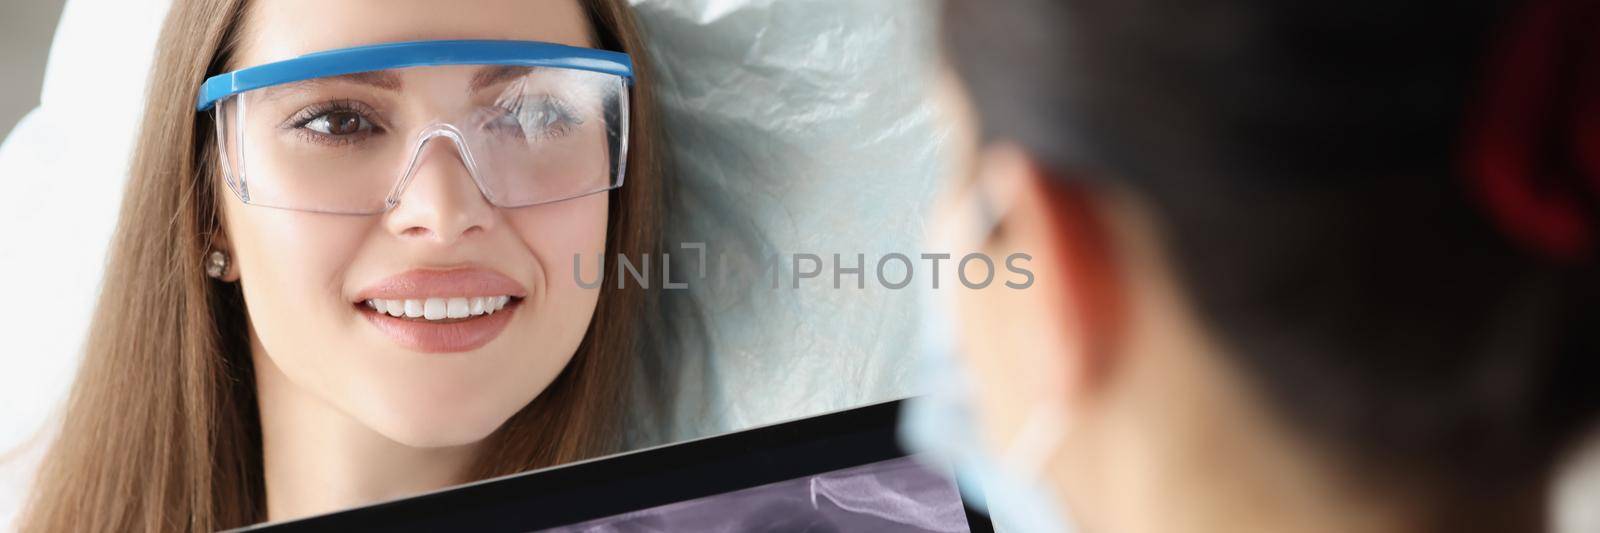 Patient on dental consultation in clinic, doctor examine teeth x ray on digital tablet device by kuprevich